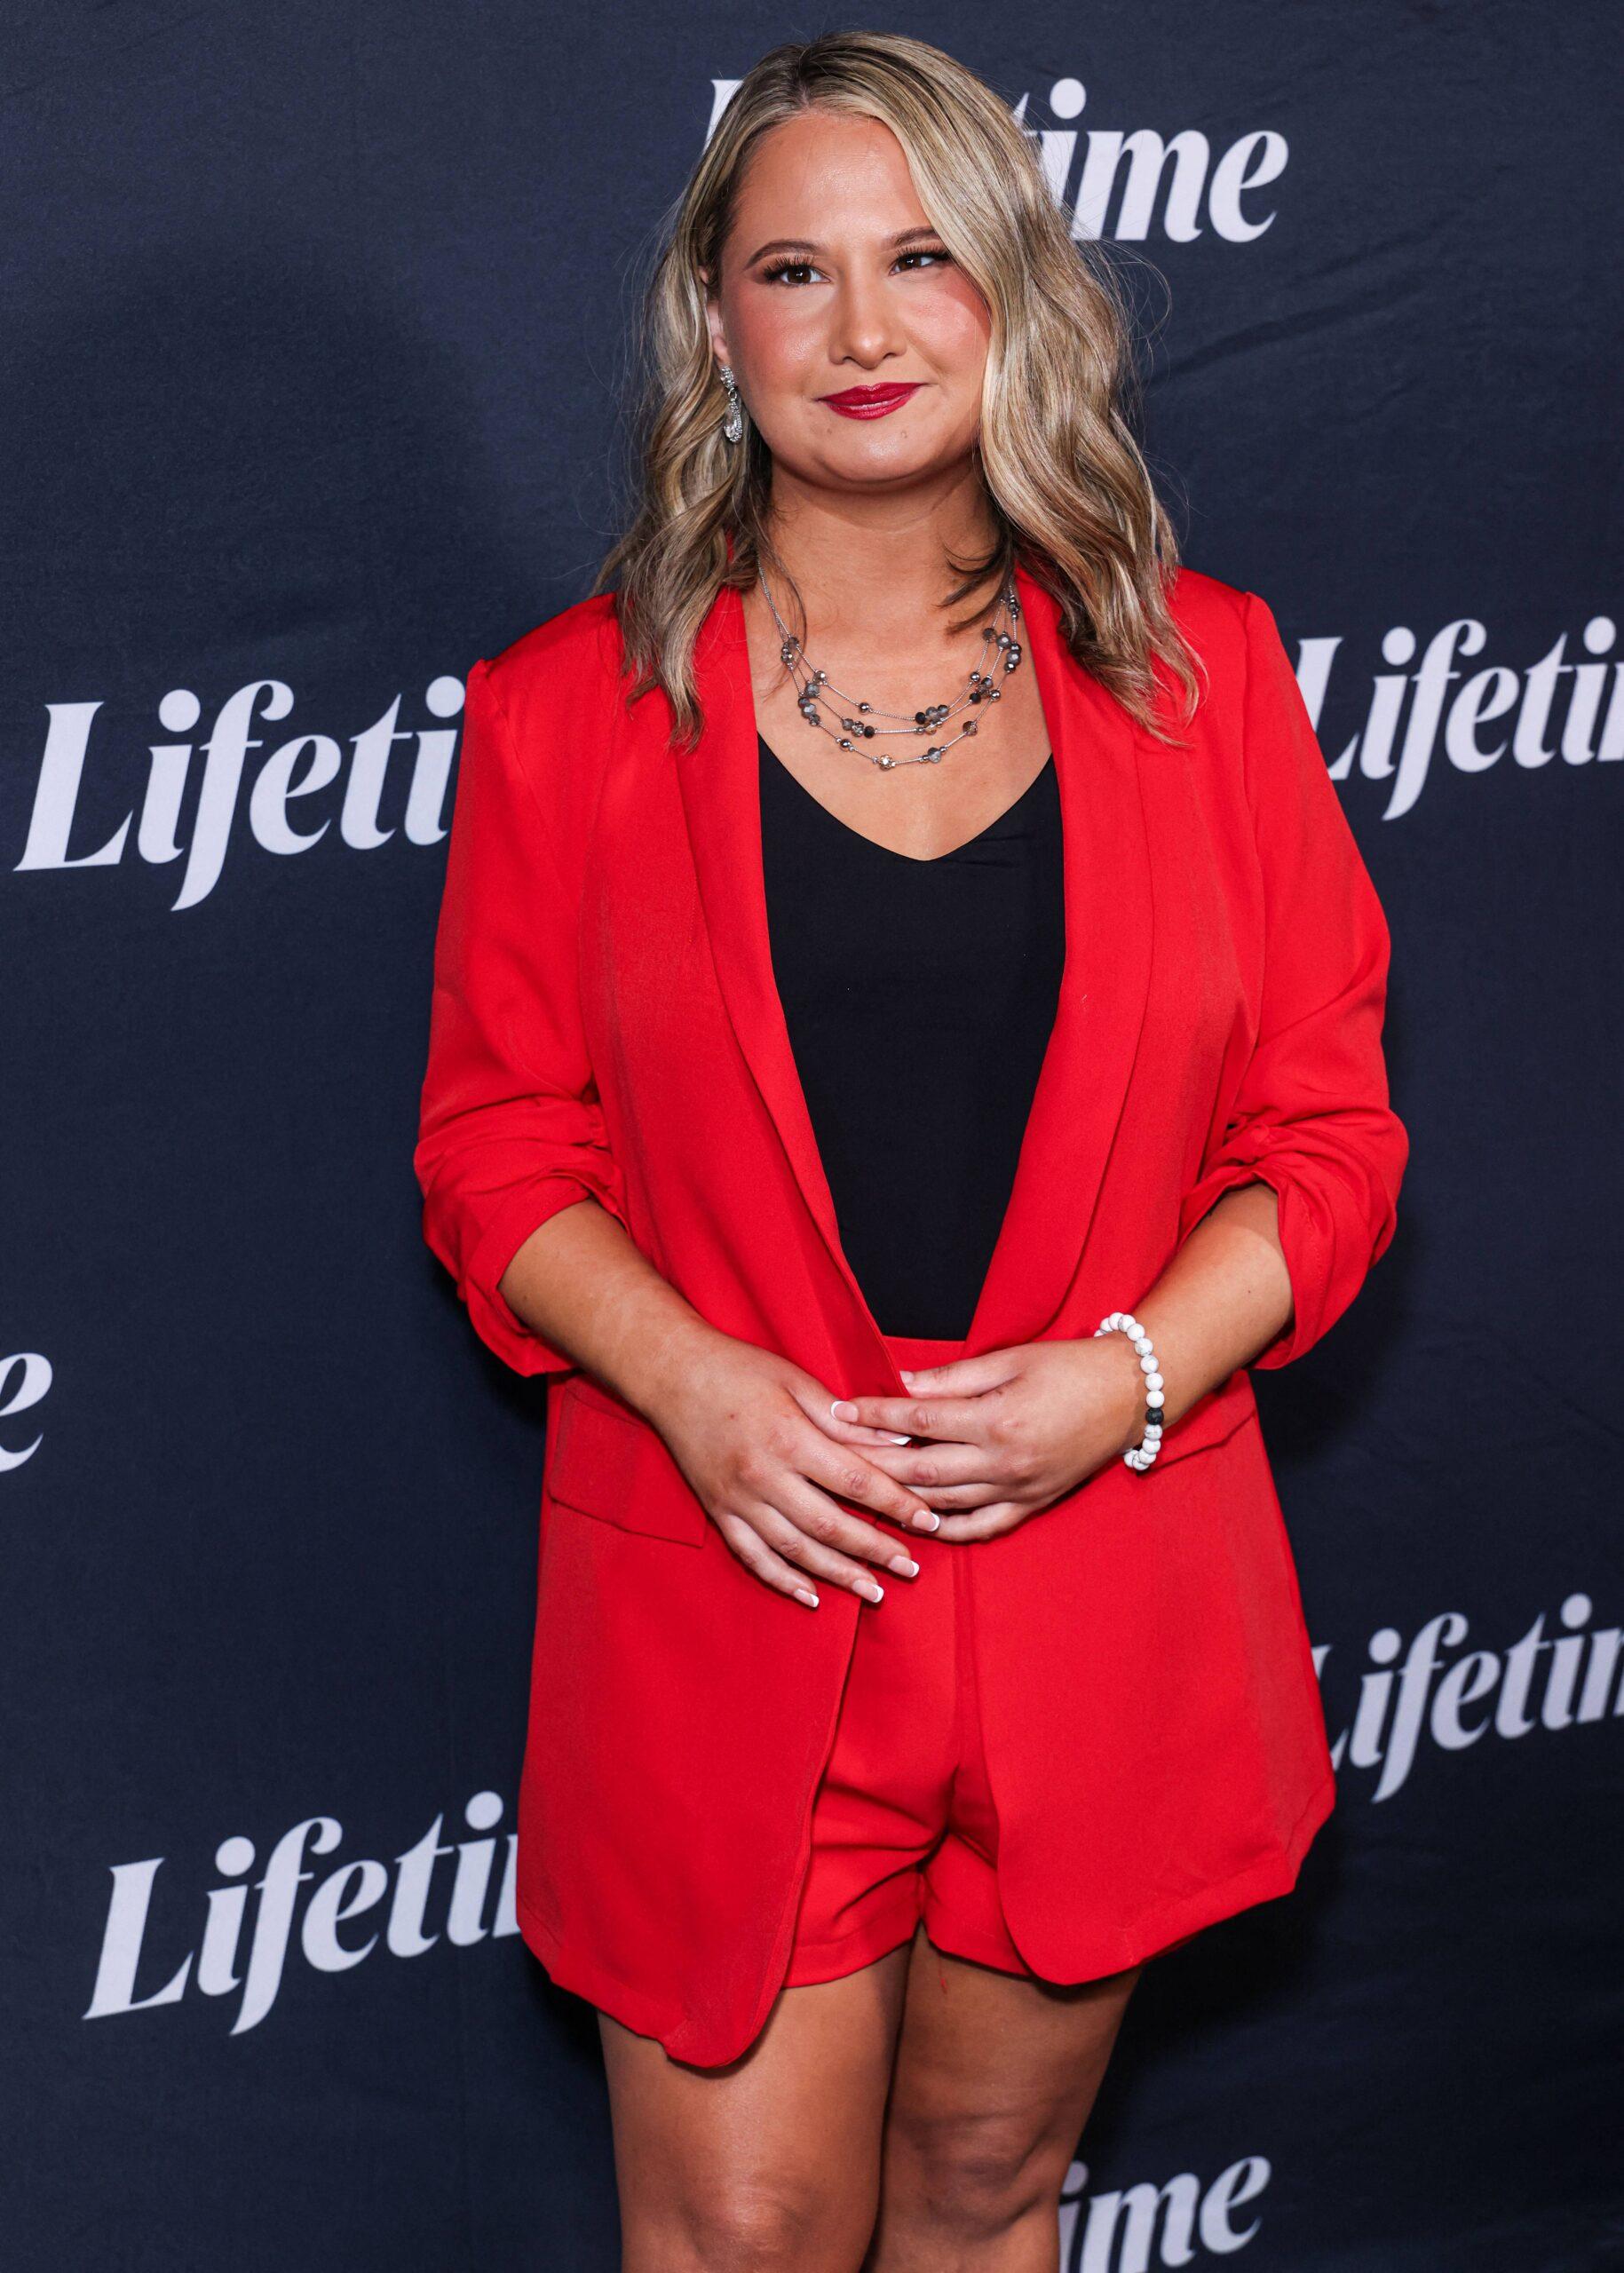 Gypsy Rose Blanchard at An Evening With Lifetime: Conversations On Controversies FYC Event